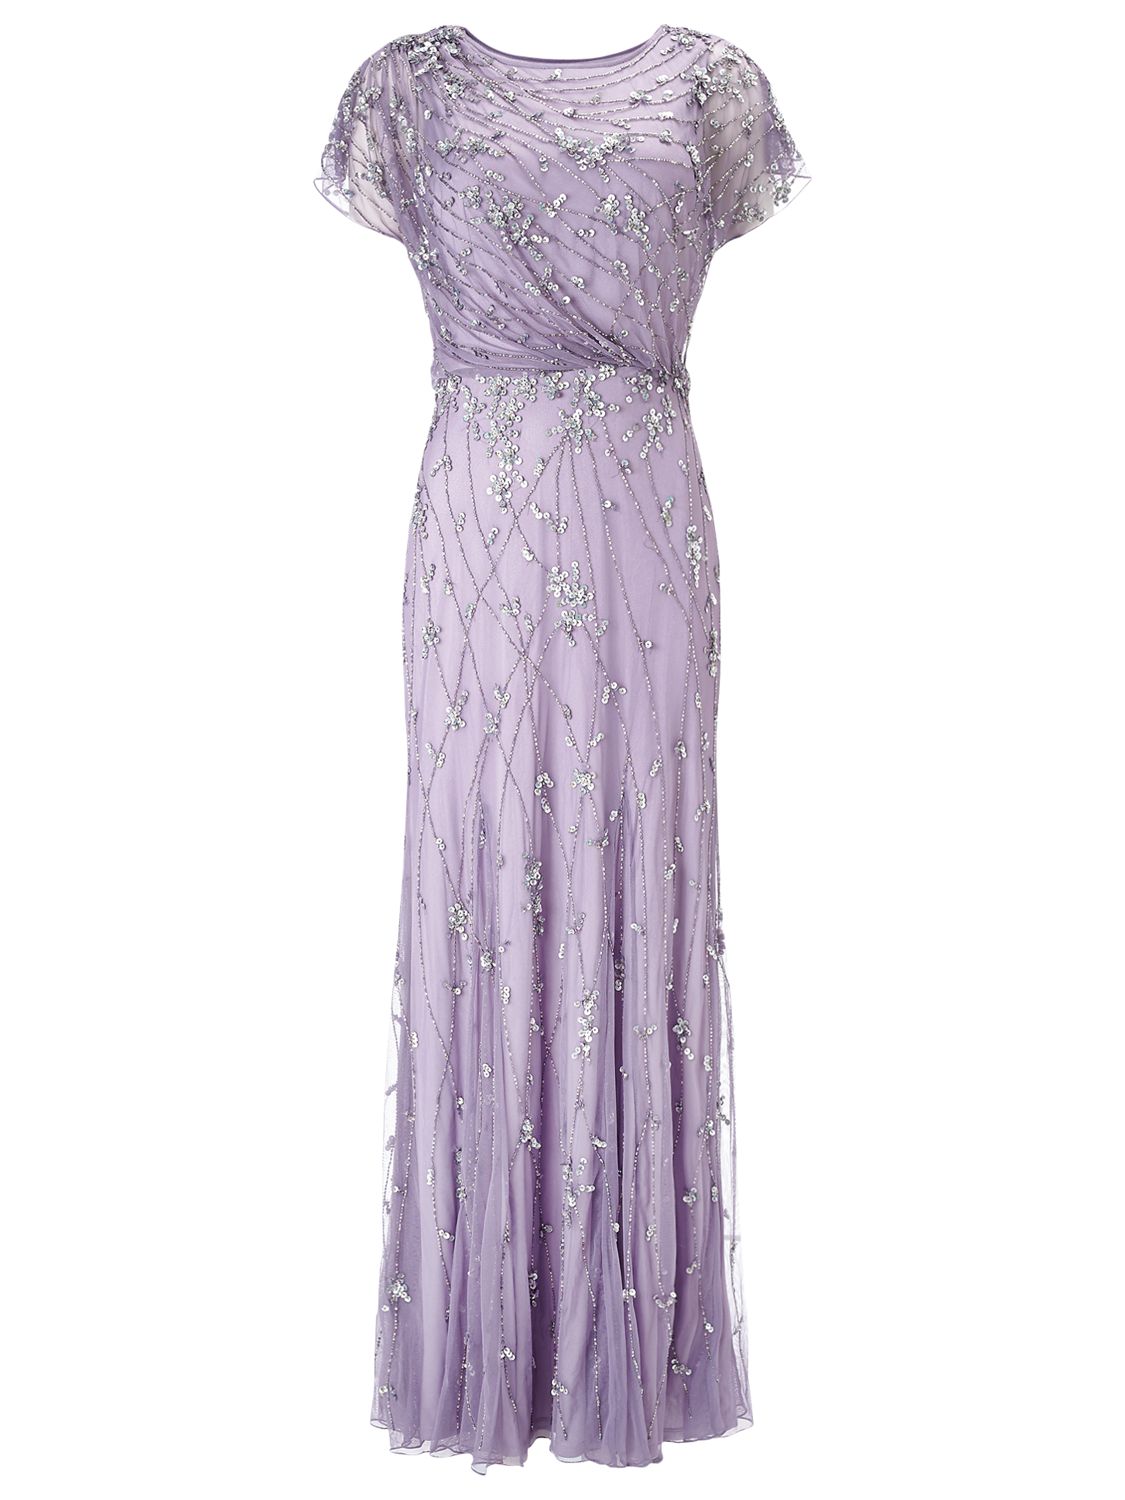 phase eight lilac dress